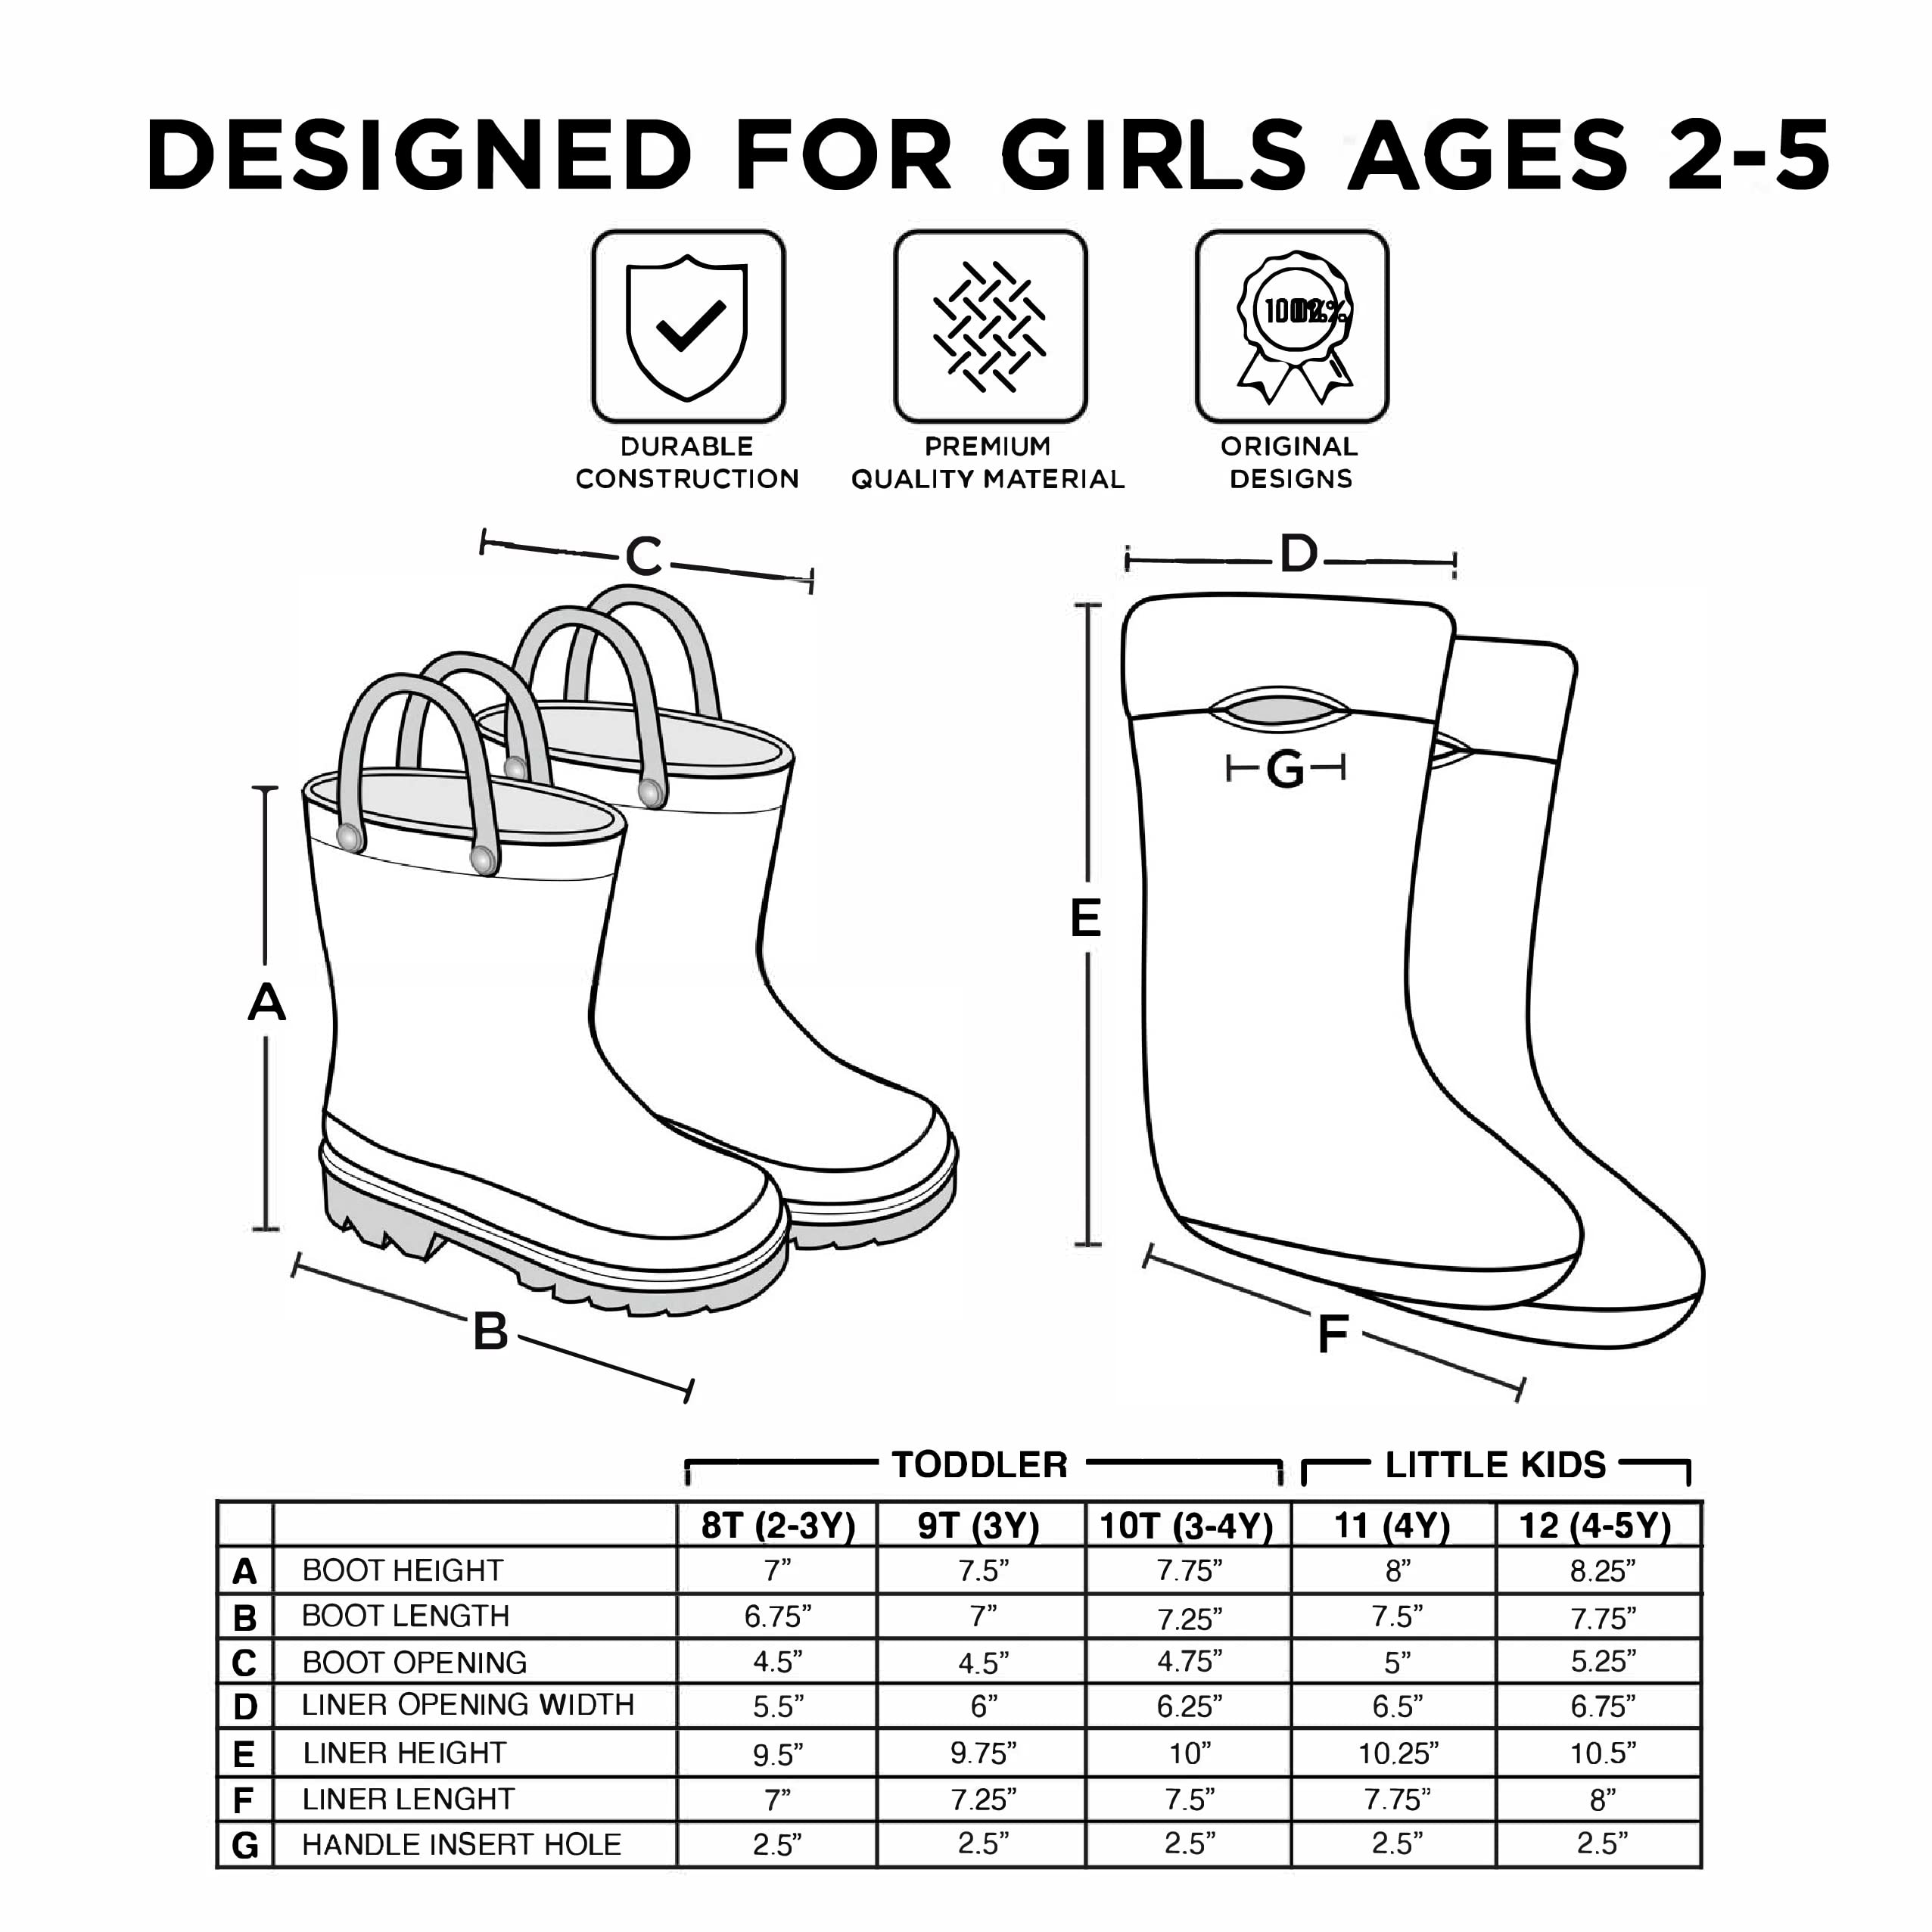 Disney Girl's Frozen Kids Rain Boots with Soft Removable Liner Snow